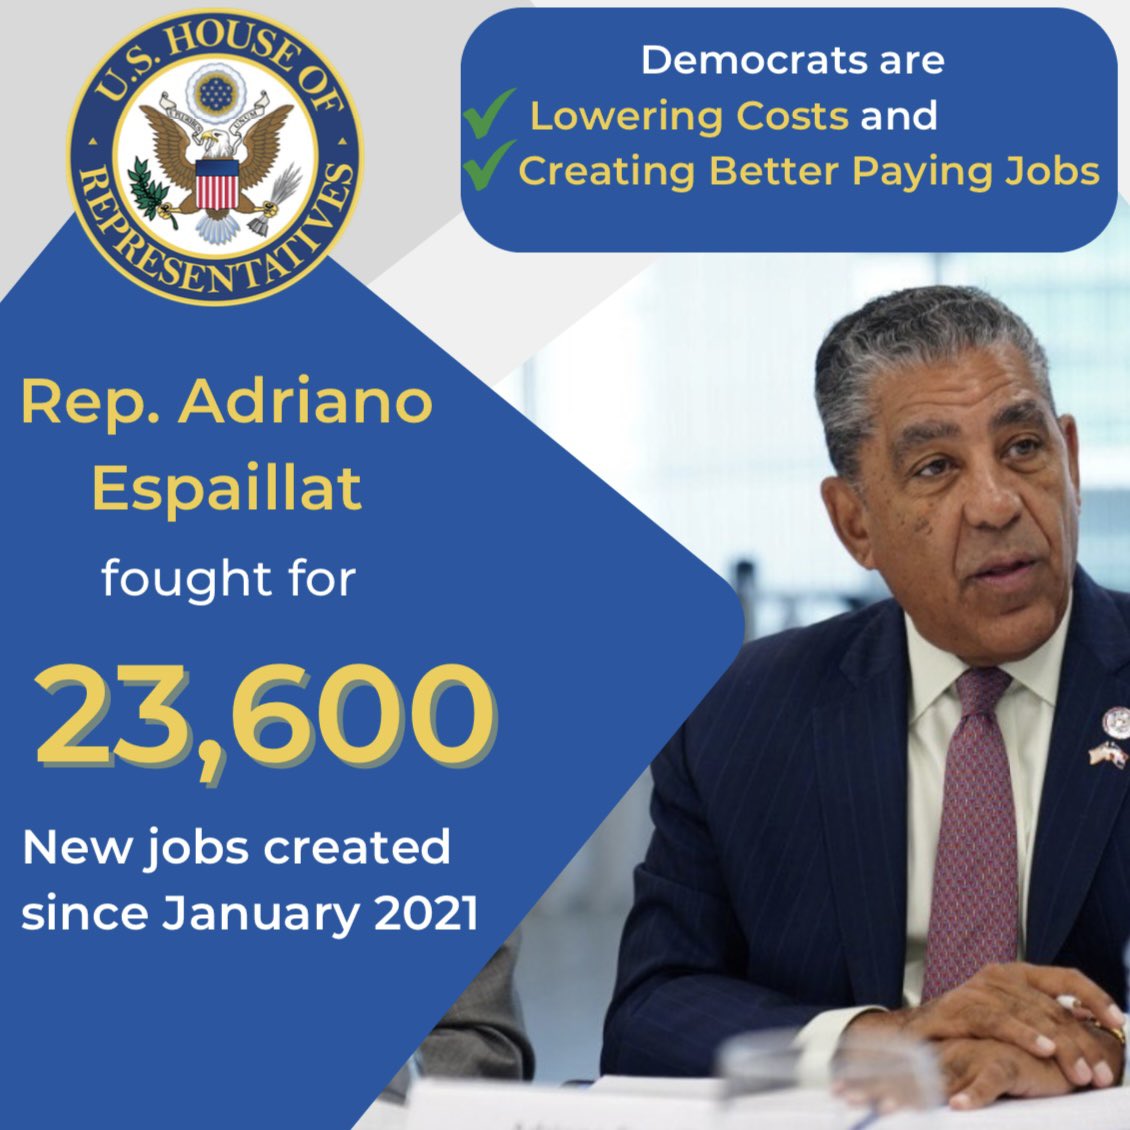 While Republicans are threatening to tank the economy to cut Social Security, I’m focused on lowering costs and creating better paying jobs to my district #PeopleOverPolitics